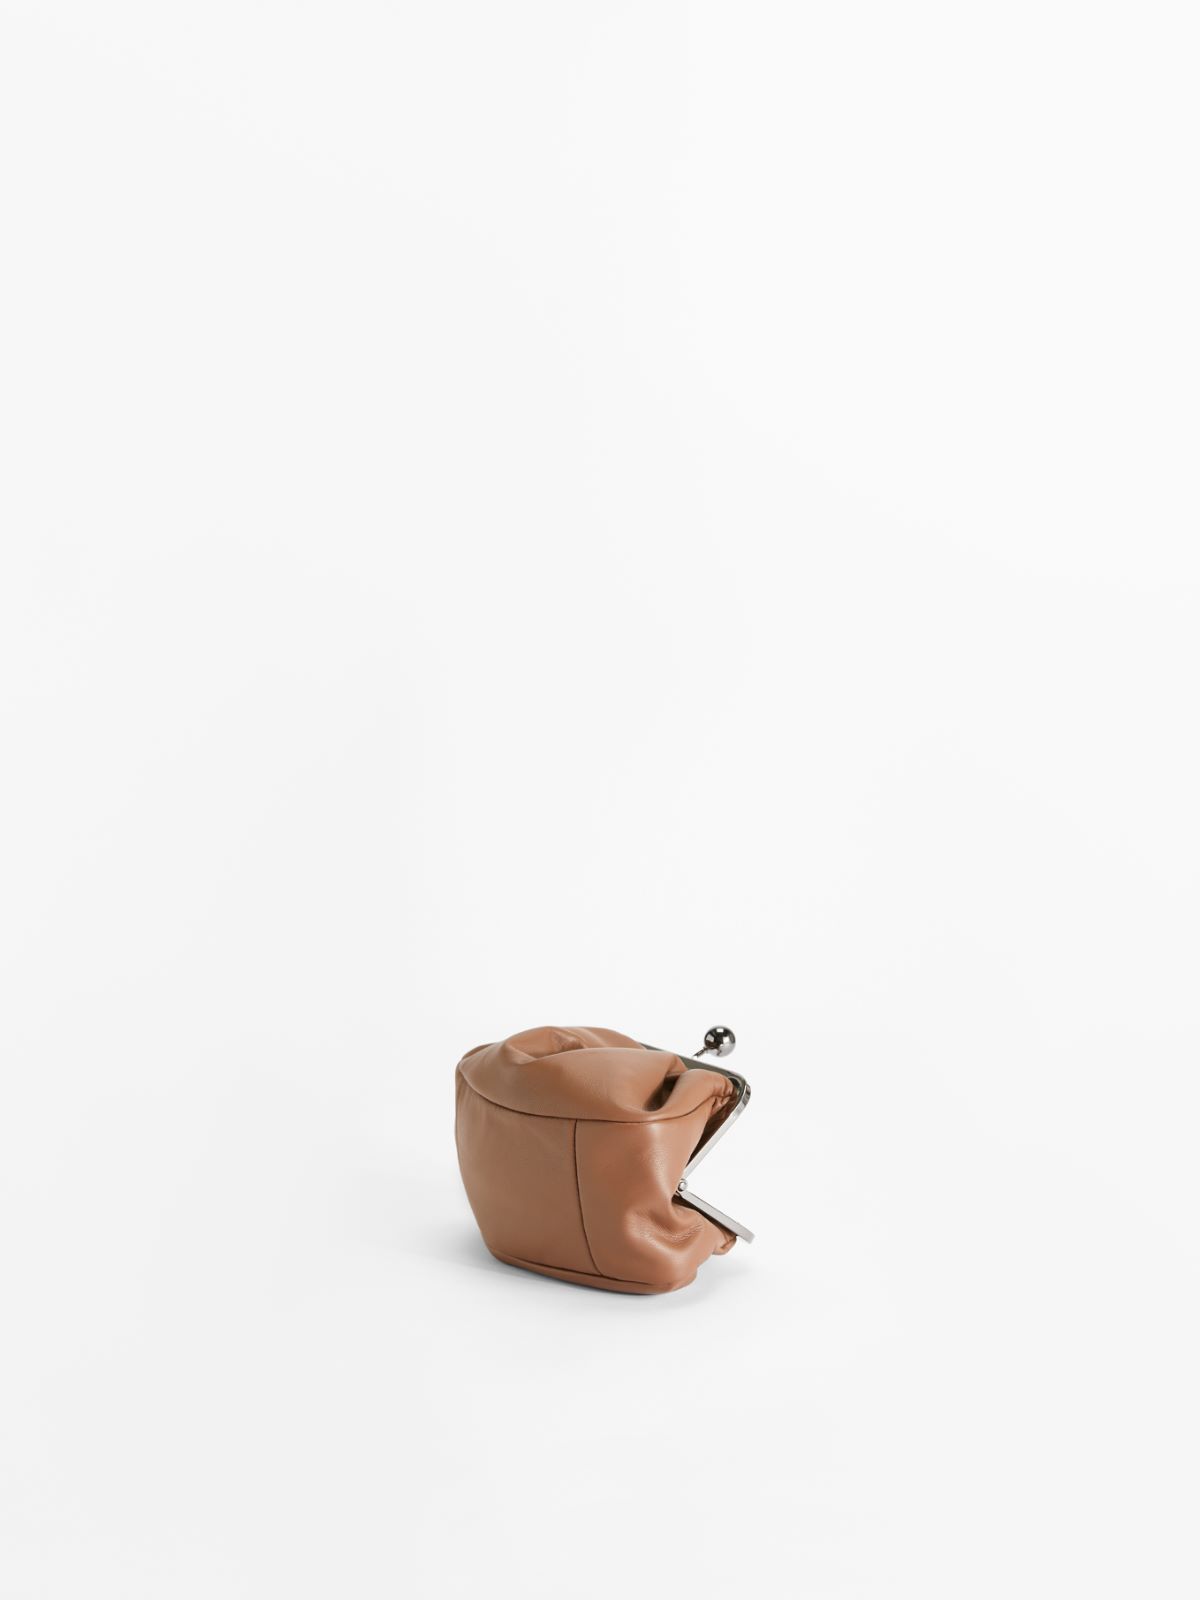 Small leather Pasticcino Bag - TOBACCO - Weekend Max Mara - 4